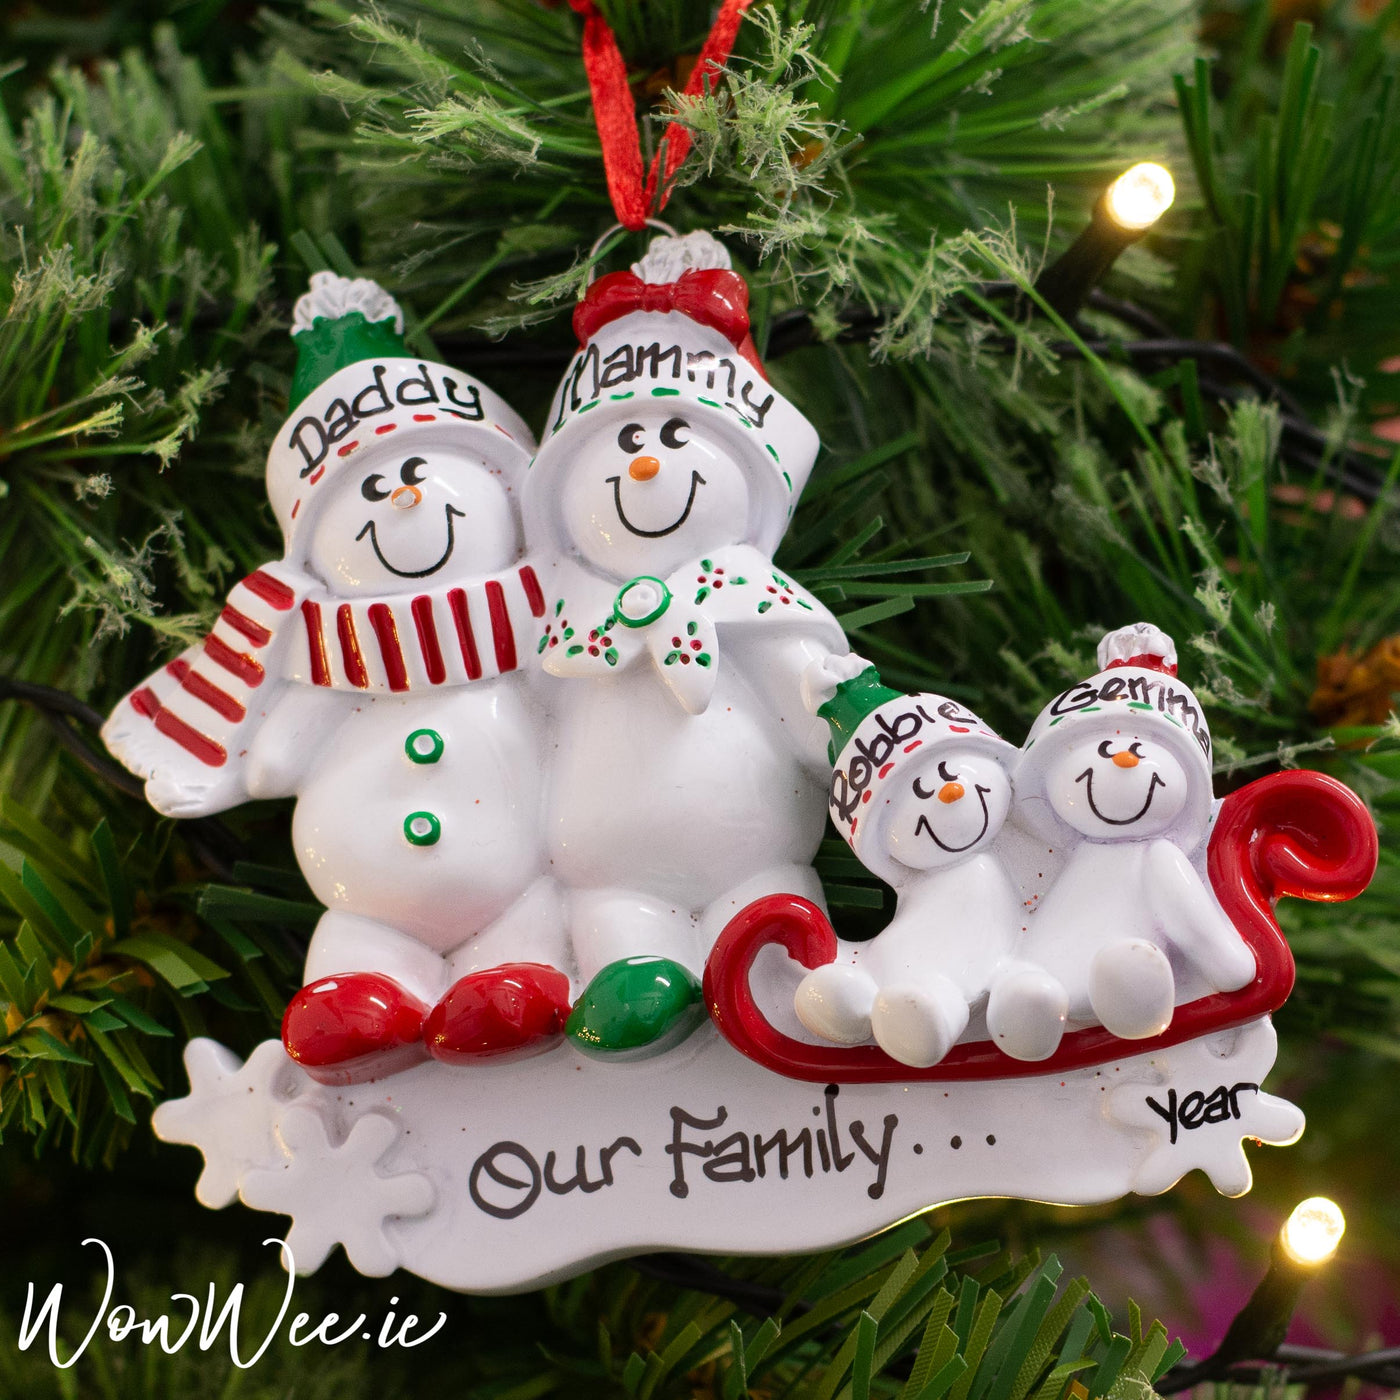 Personalised Christmas Decorations - Snowman Sled 4 - WowWee.ie Personalised Gifts